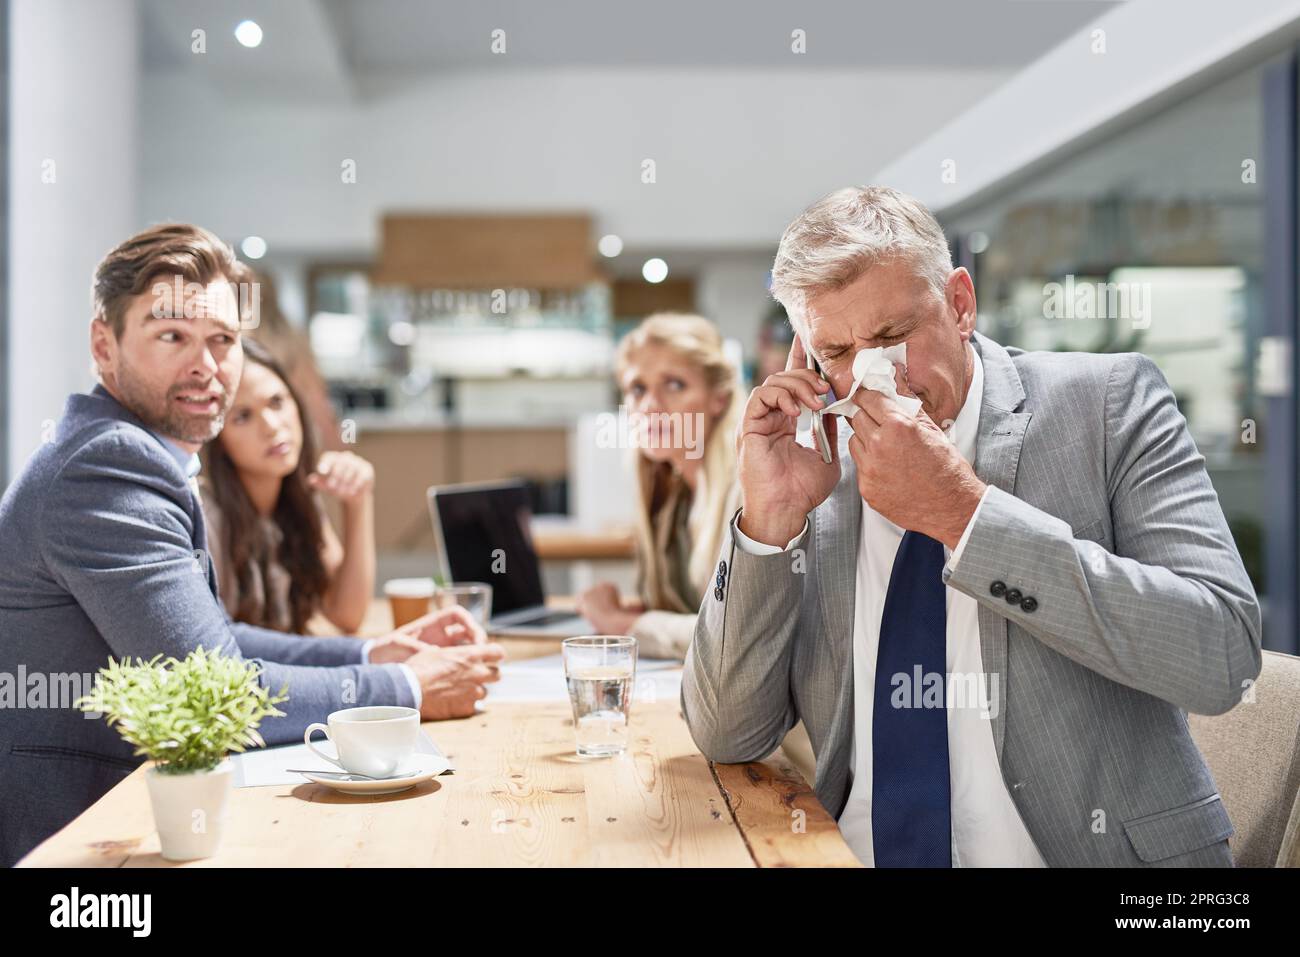 Its time to call the doctor. a businessman blowing his nose while his colleagues look on in disgust. Stock Photo